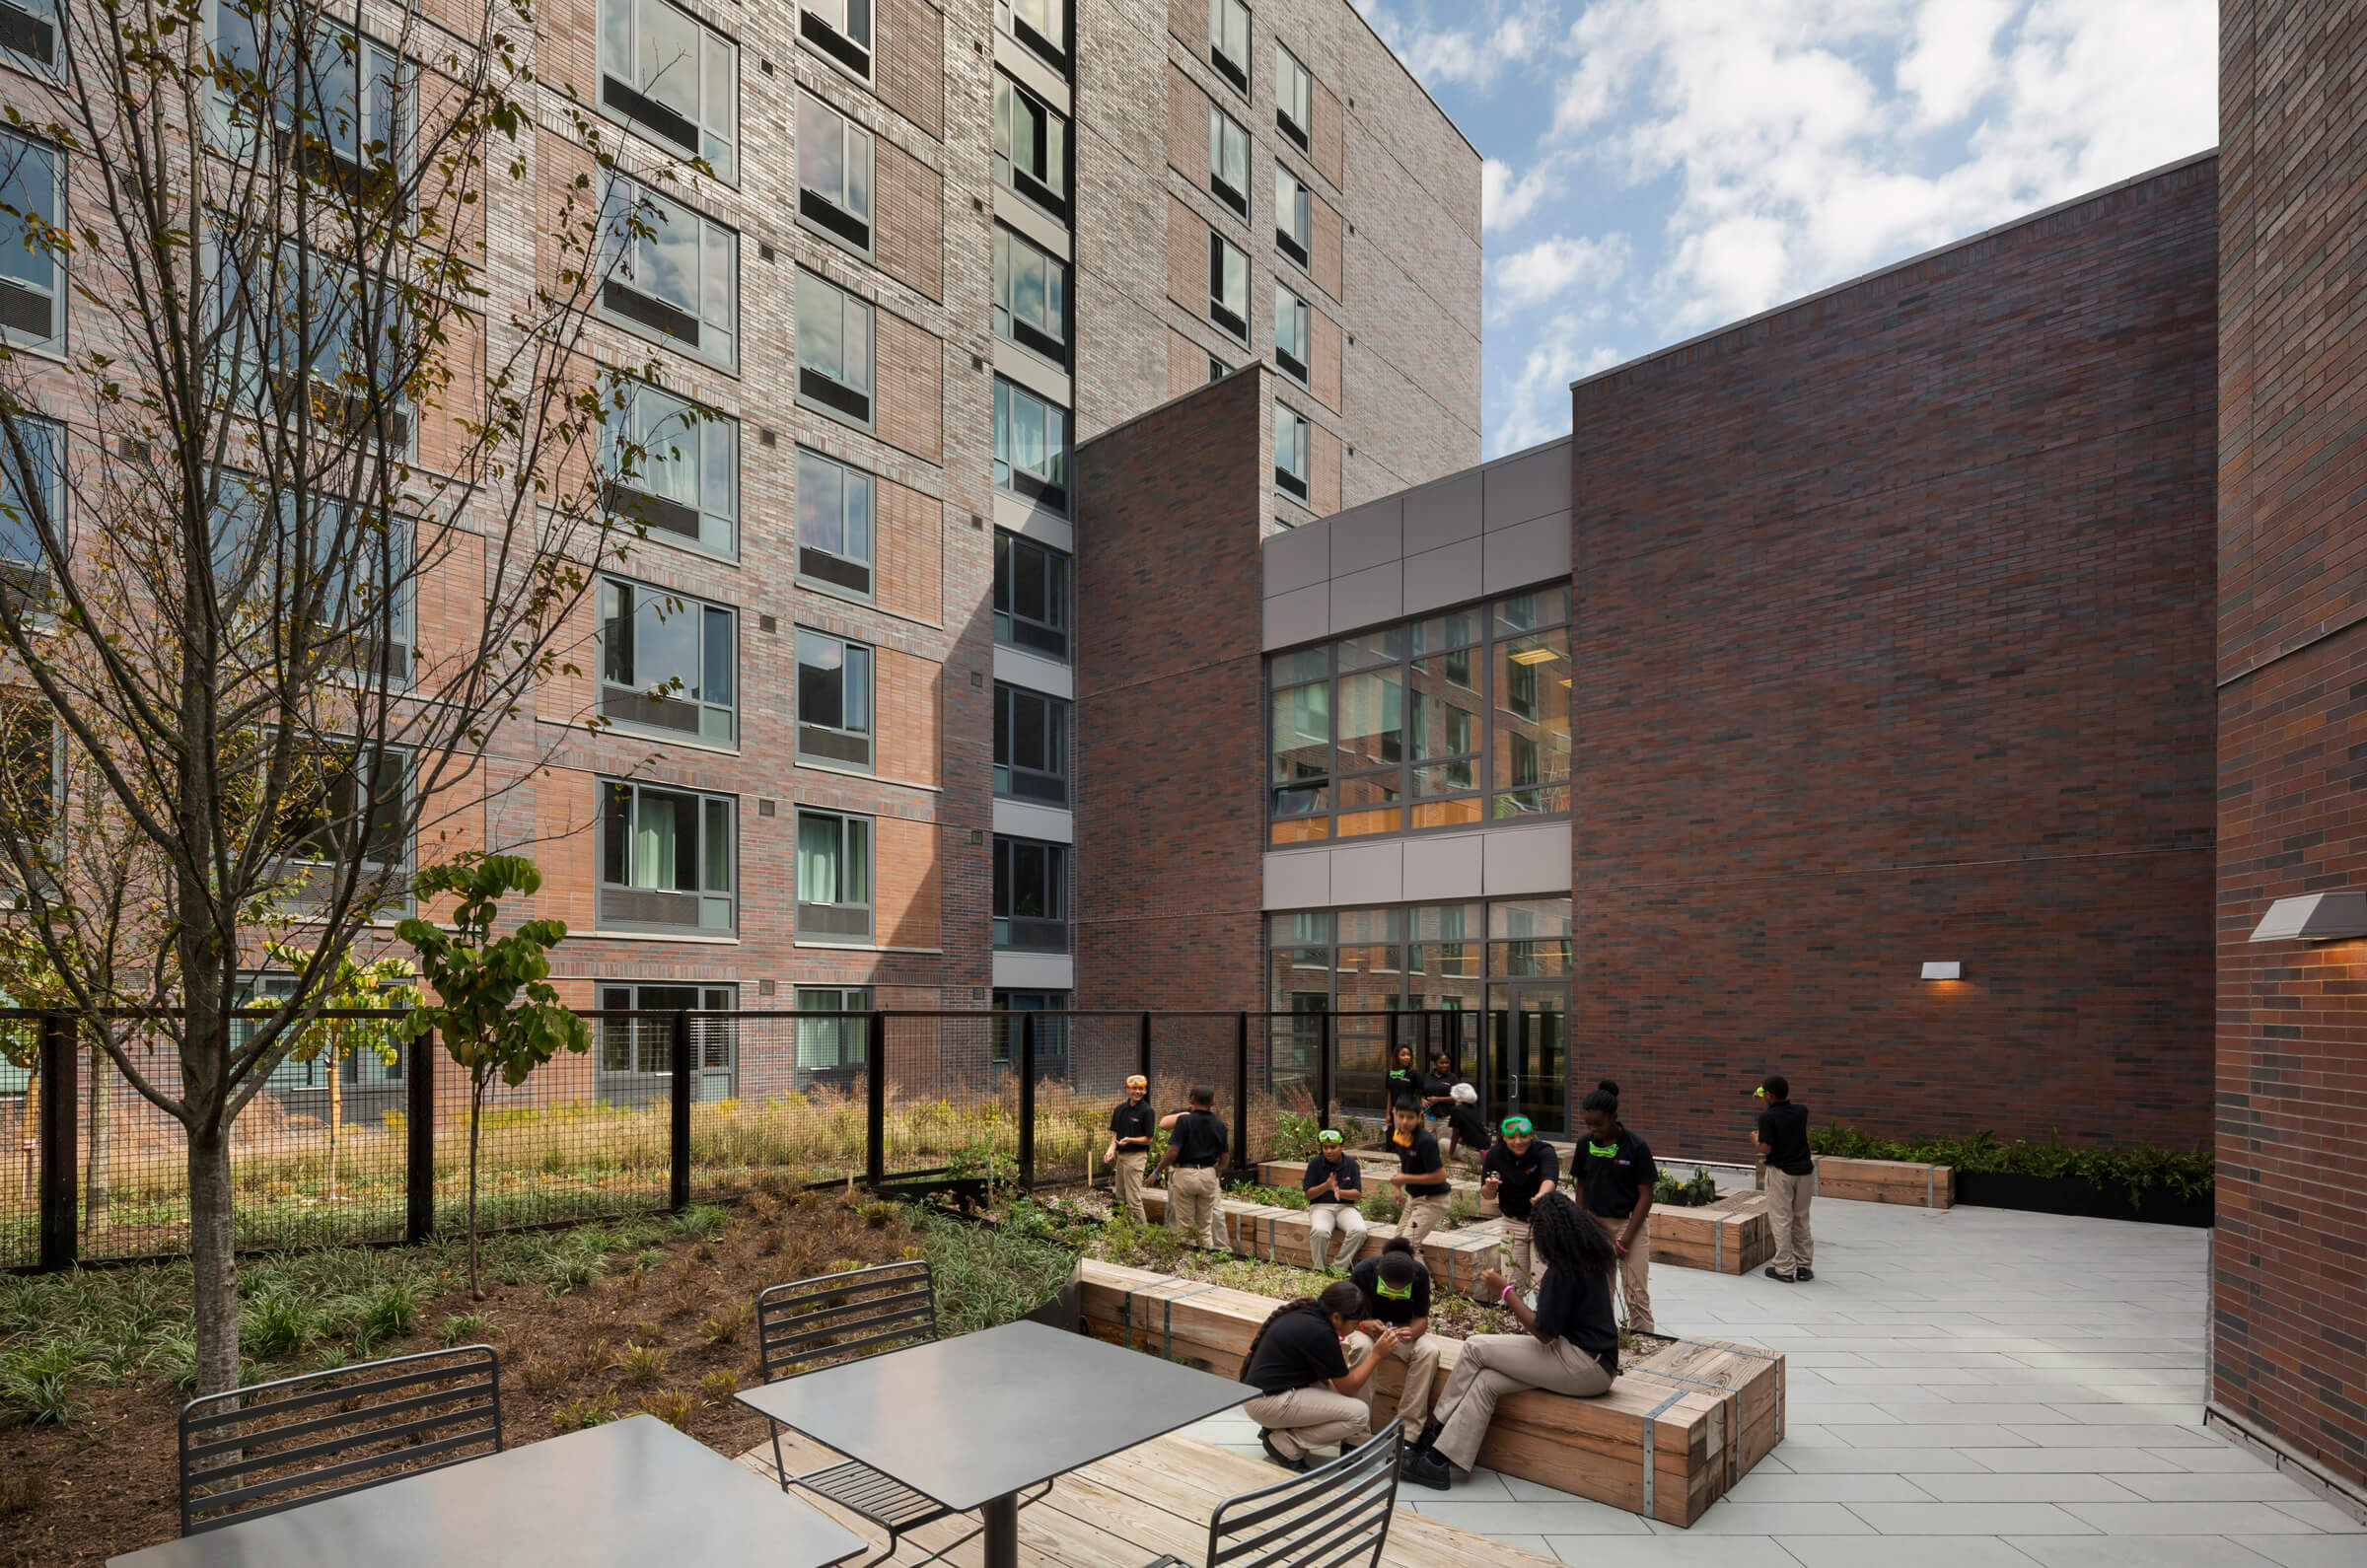 Students sitting in the rooftop garden of the DREAM Charter School affordable housing